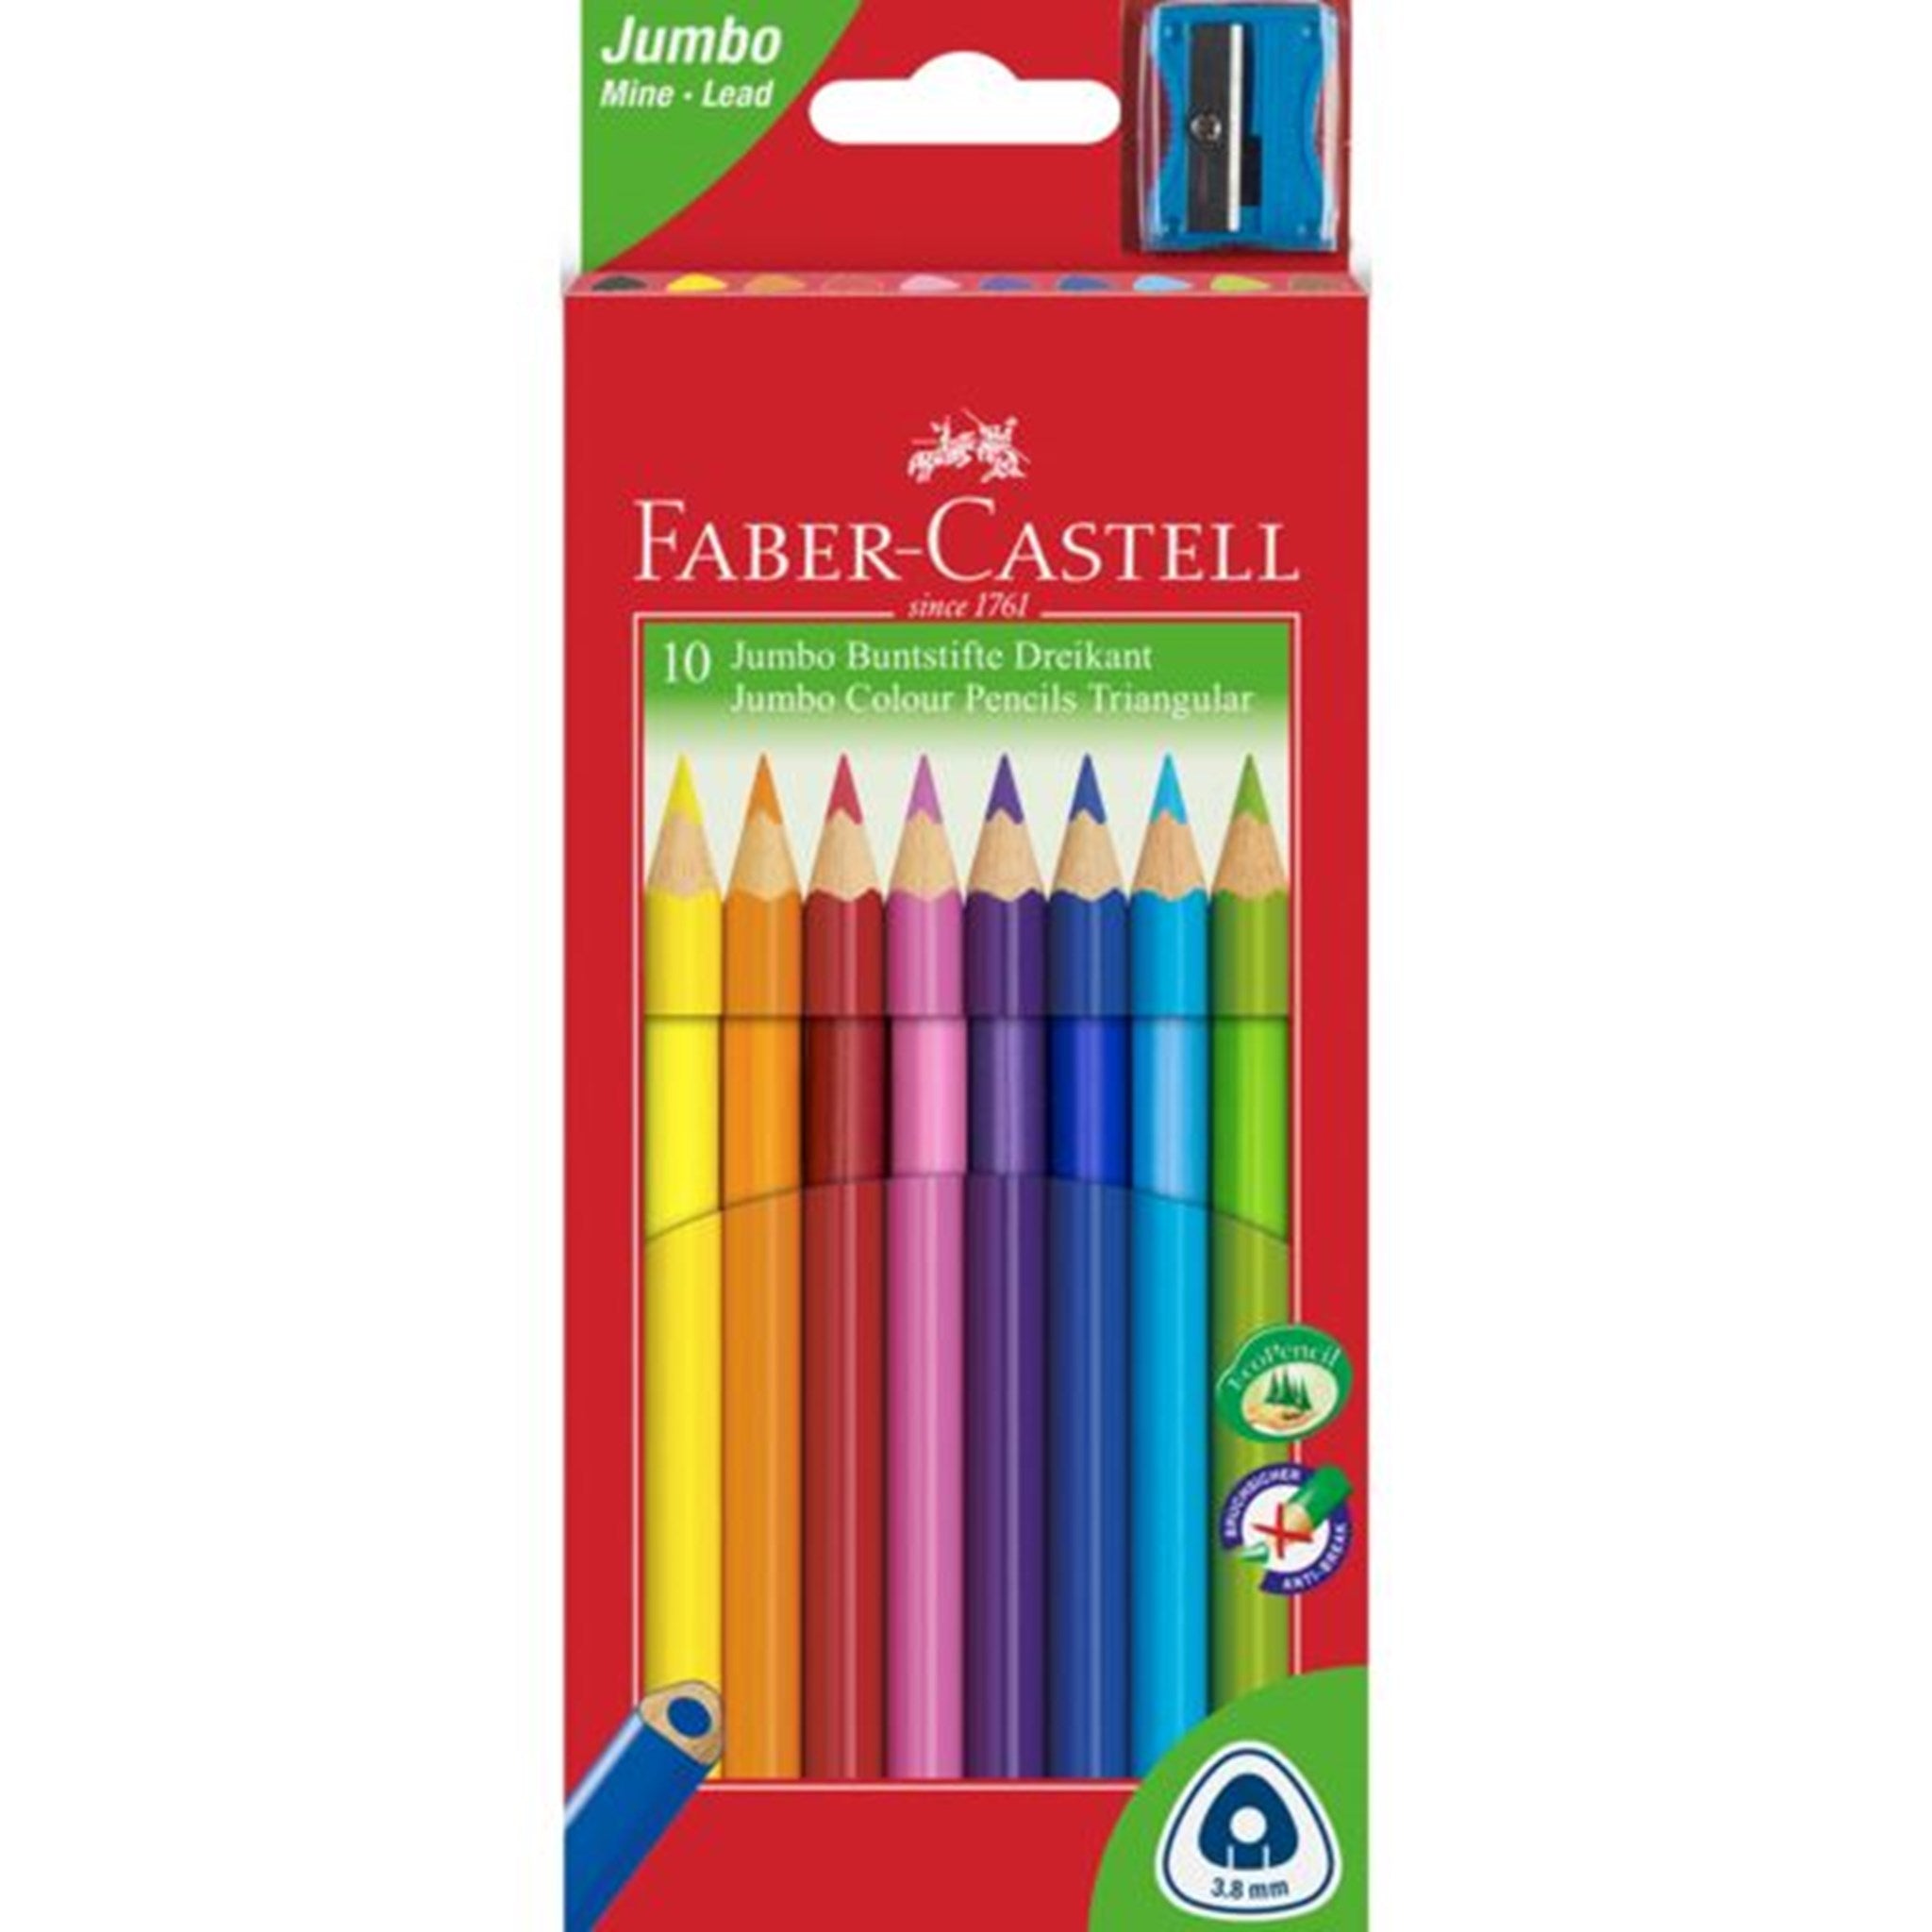 Faber Castell Jumbo 10 Thick Colour Pencils